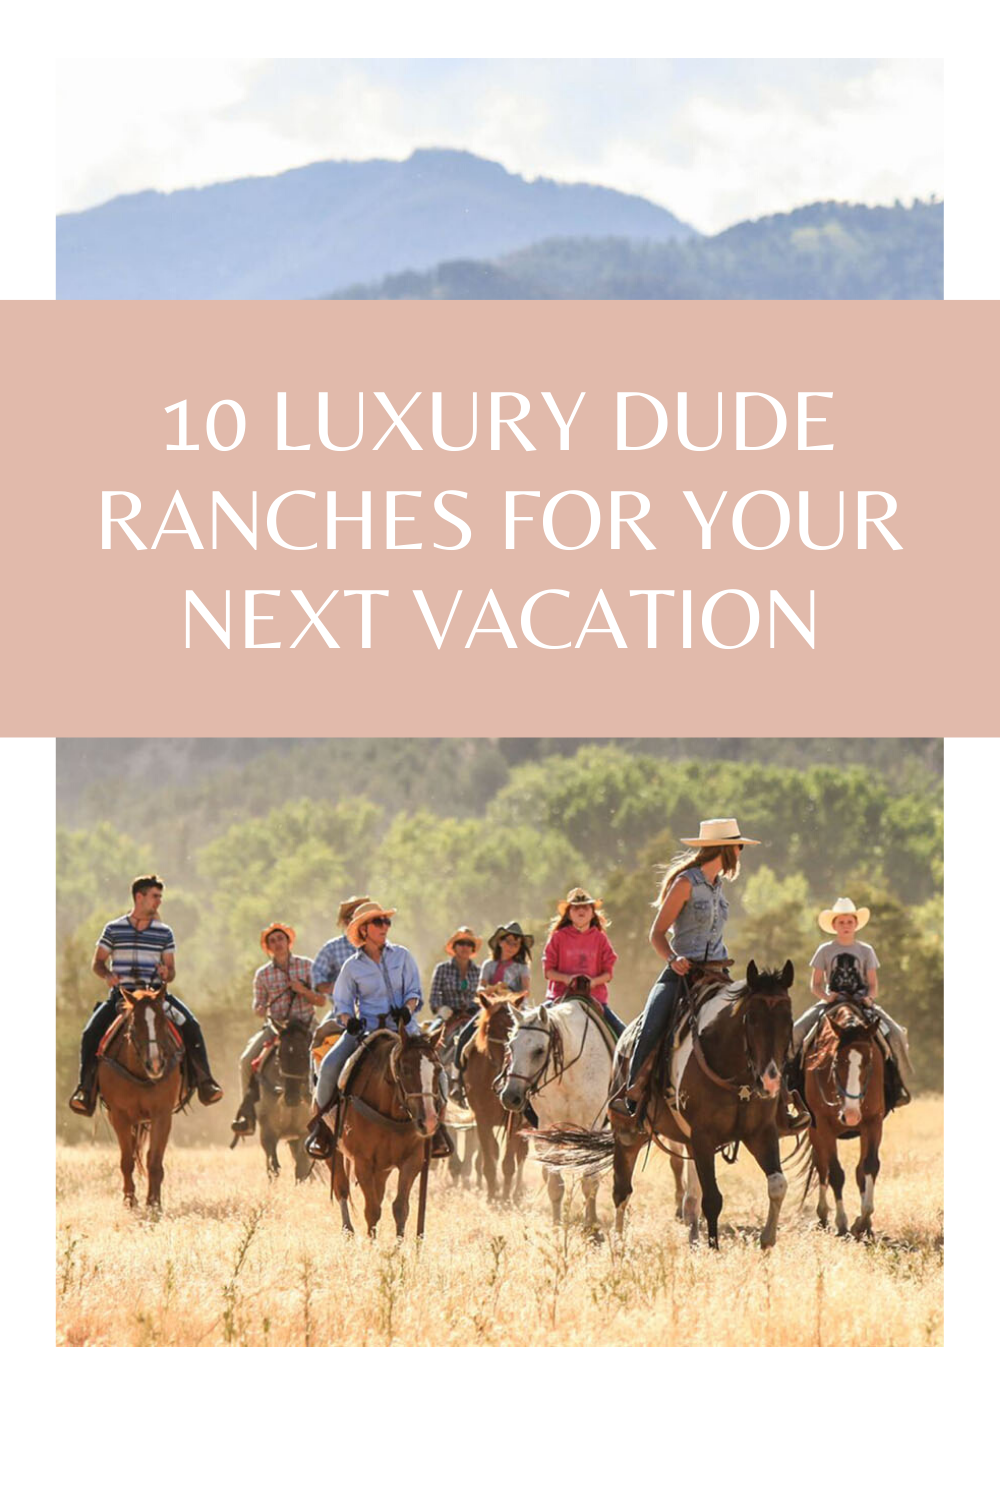 Luxury Dude Ranches